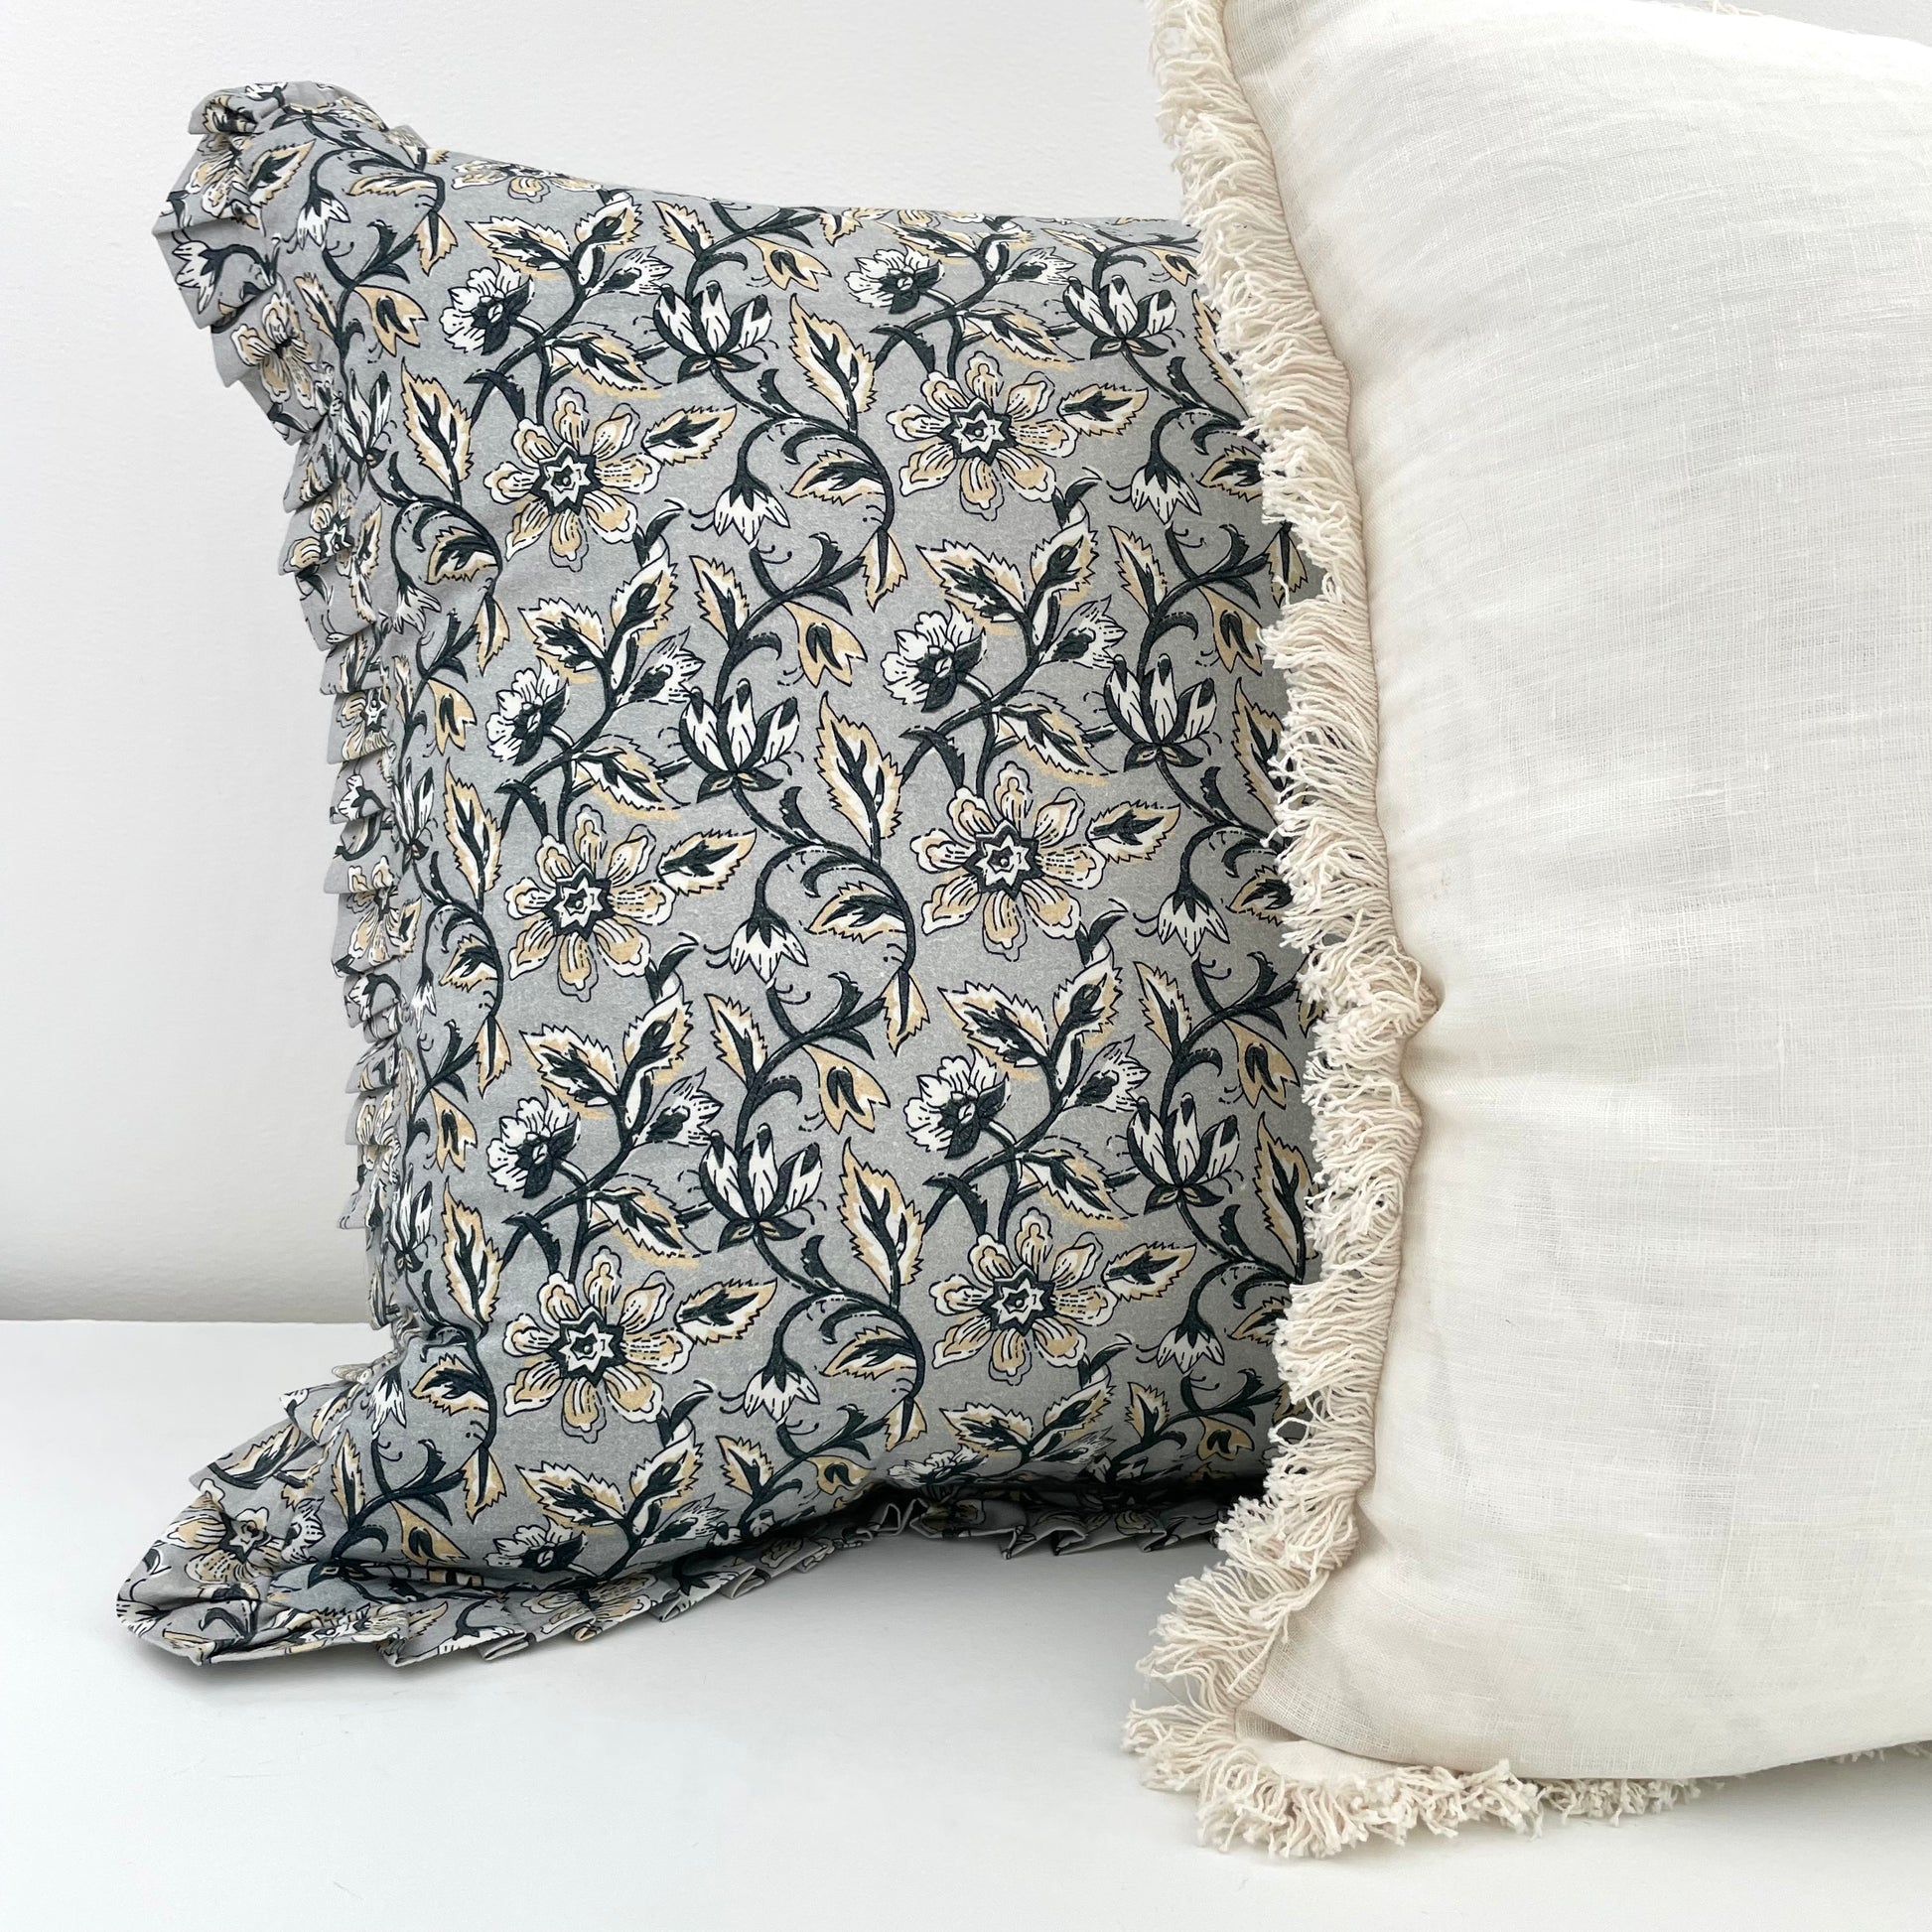 off white linen pillow cover and grey floral with ruffled edges